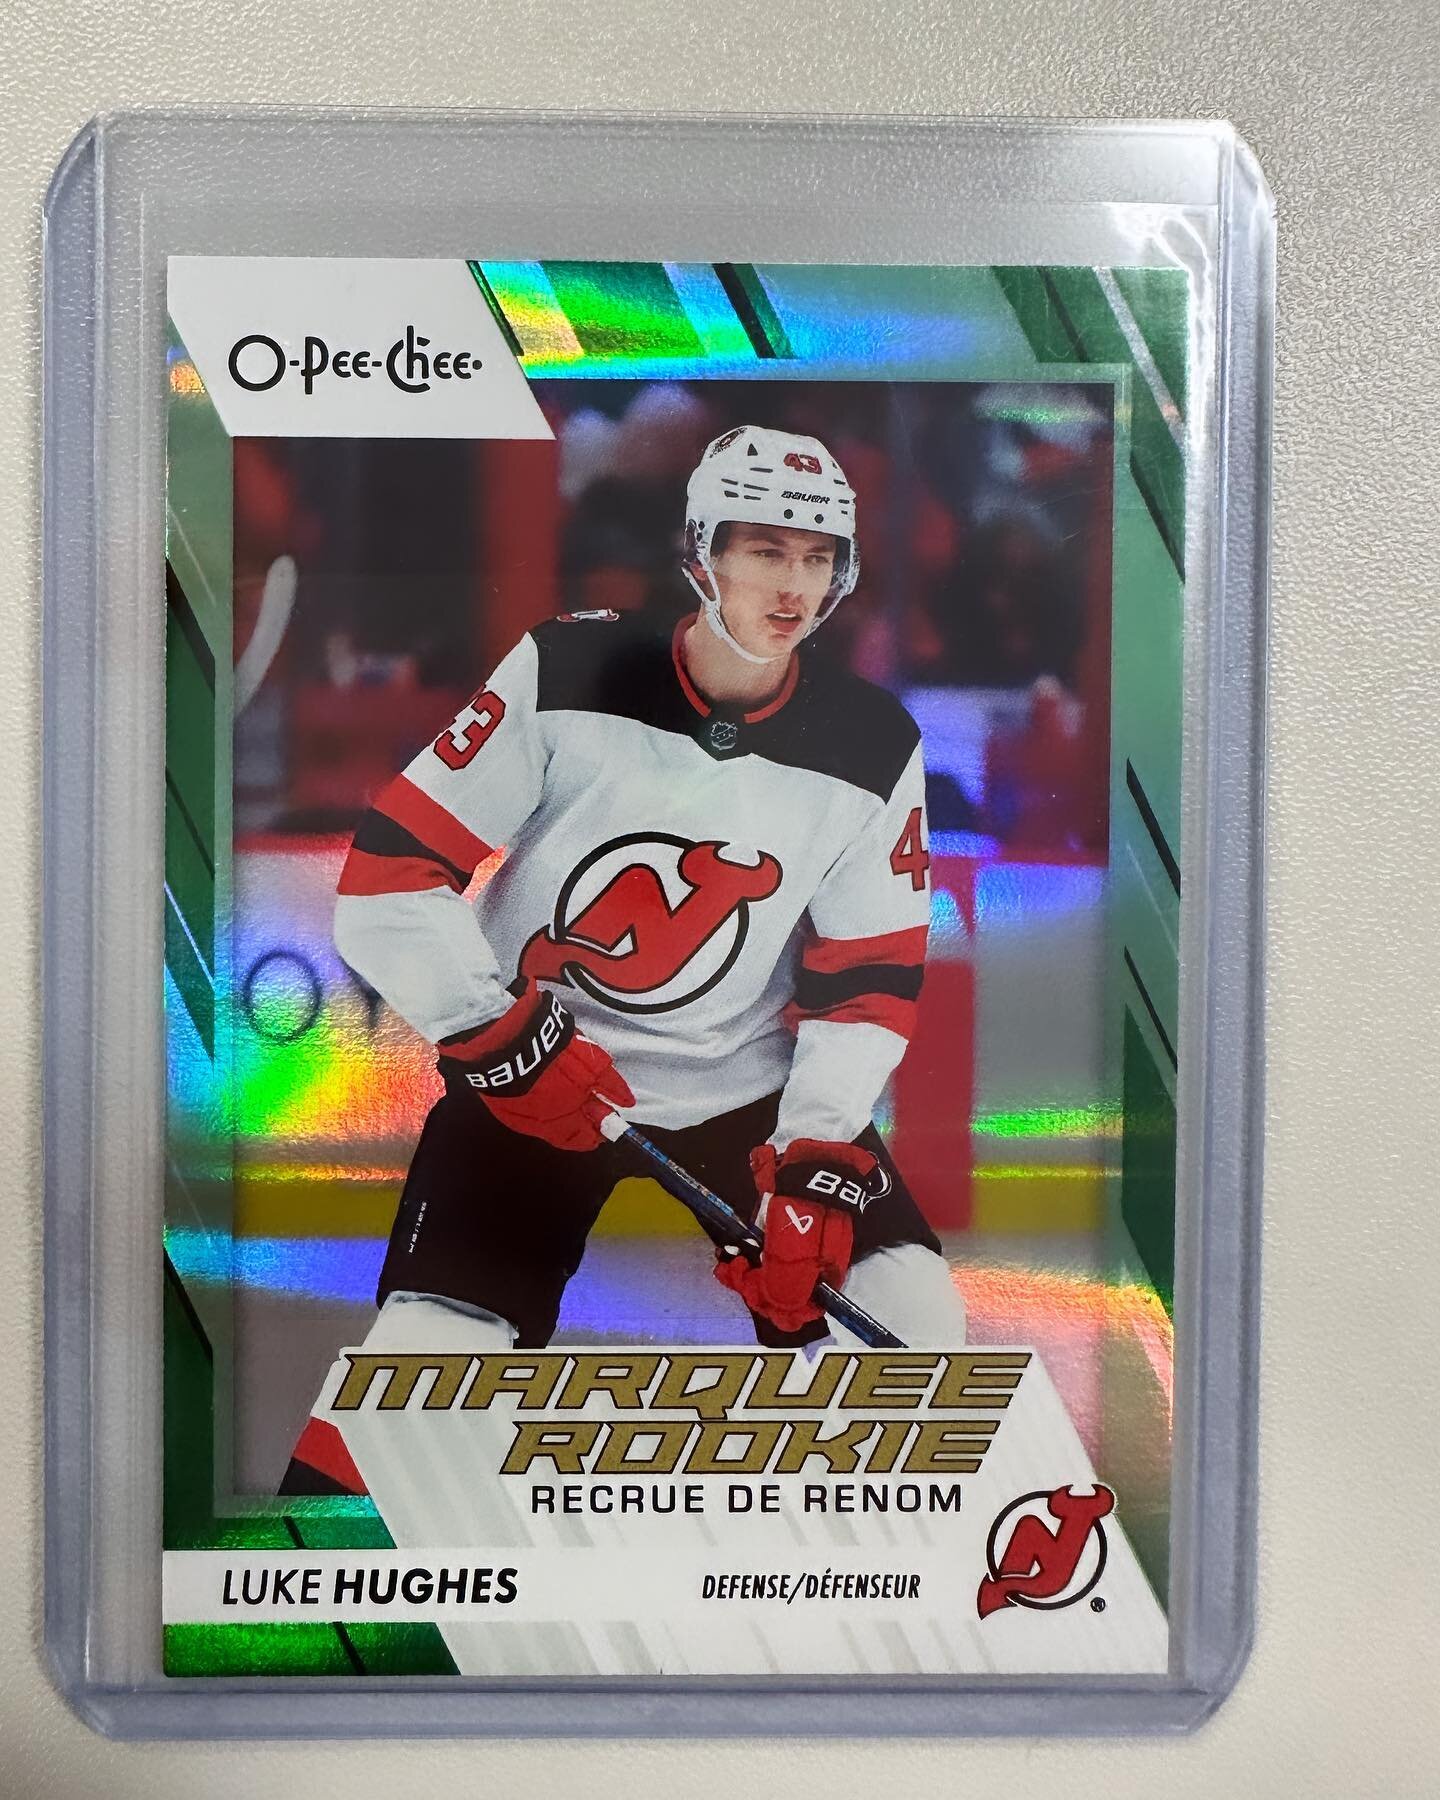 Great pull out of an O-Pee-Chee box by a lucky customer today! Luke Hughes green rookie /33!

Great looking card!